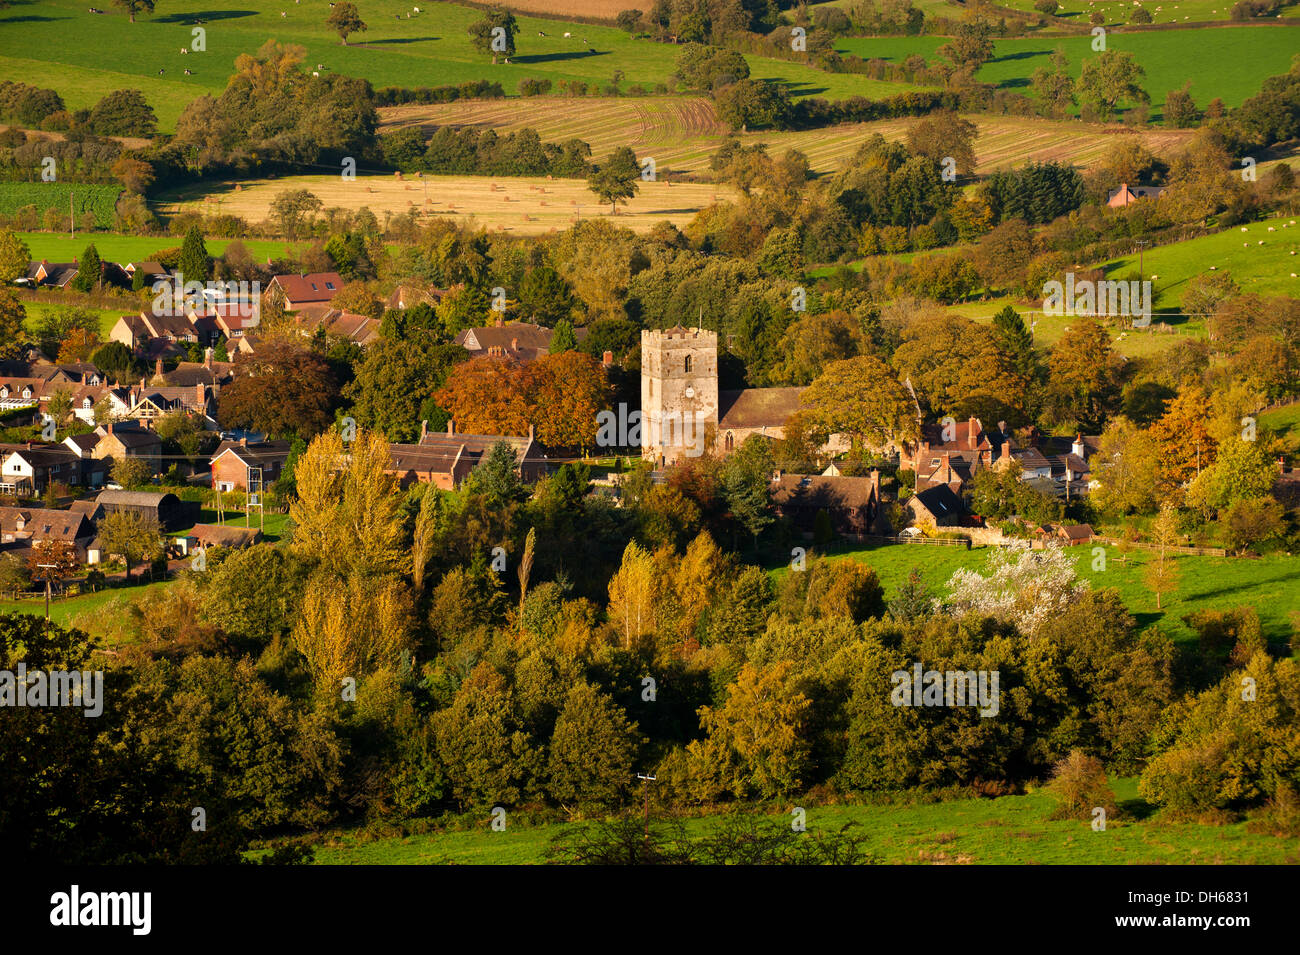 The village of Cardington in the Shropshire hills, England Stock Photo